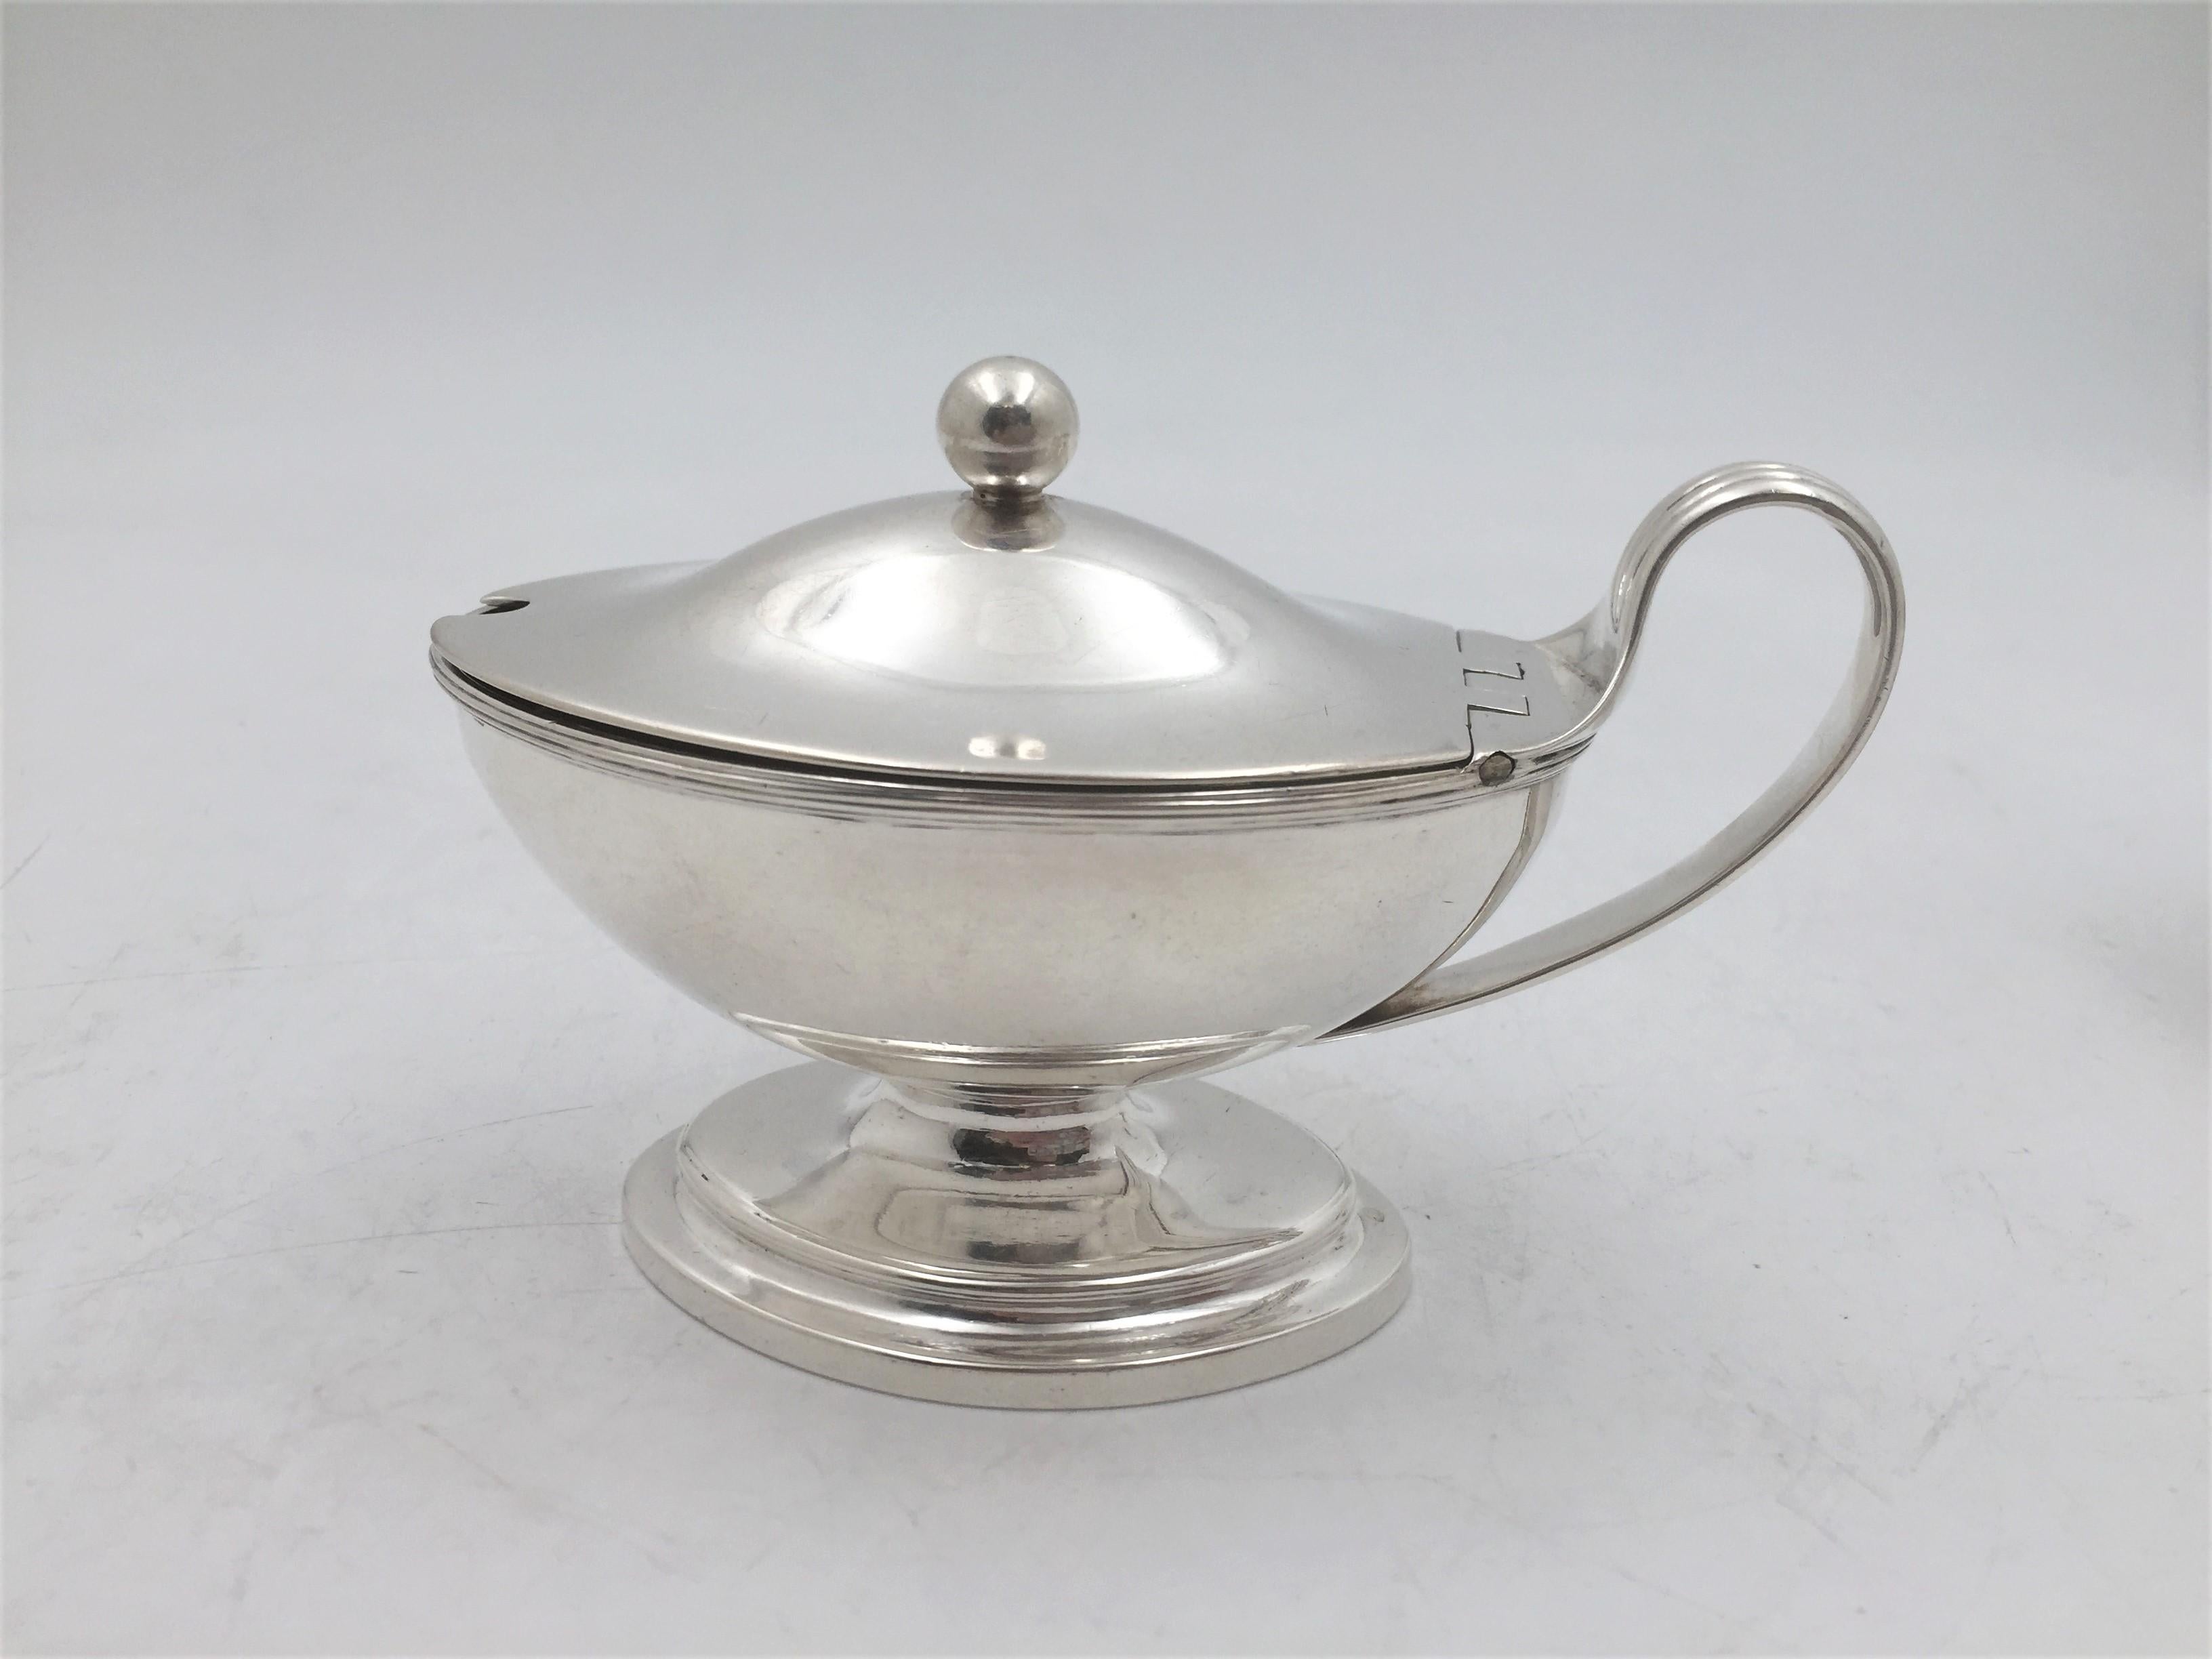 John Wakelin & William Taylor pair of sterling silver open salts from 1783 in Georgian style with gilt wash bowls and in exquisite, geometric design. Each measures 3 2/3'' in length by 2 1/2'' in width by 2 1/4'' in height, and bears hallmarks as